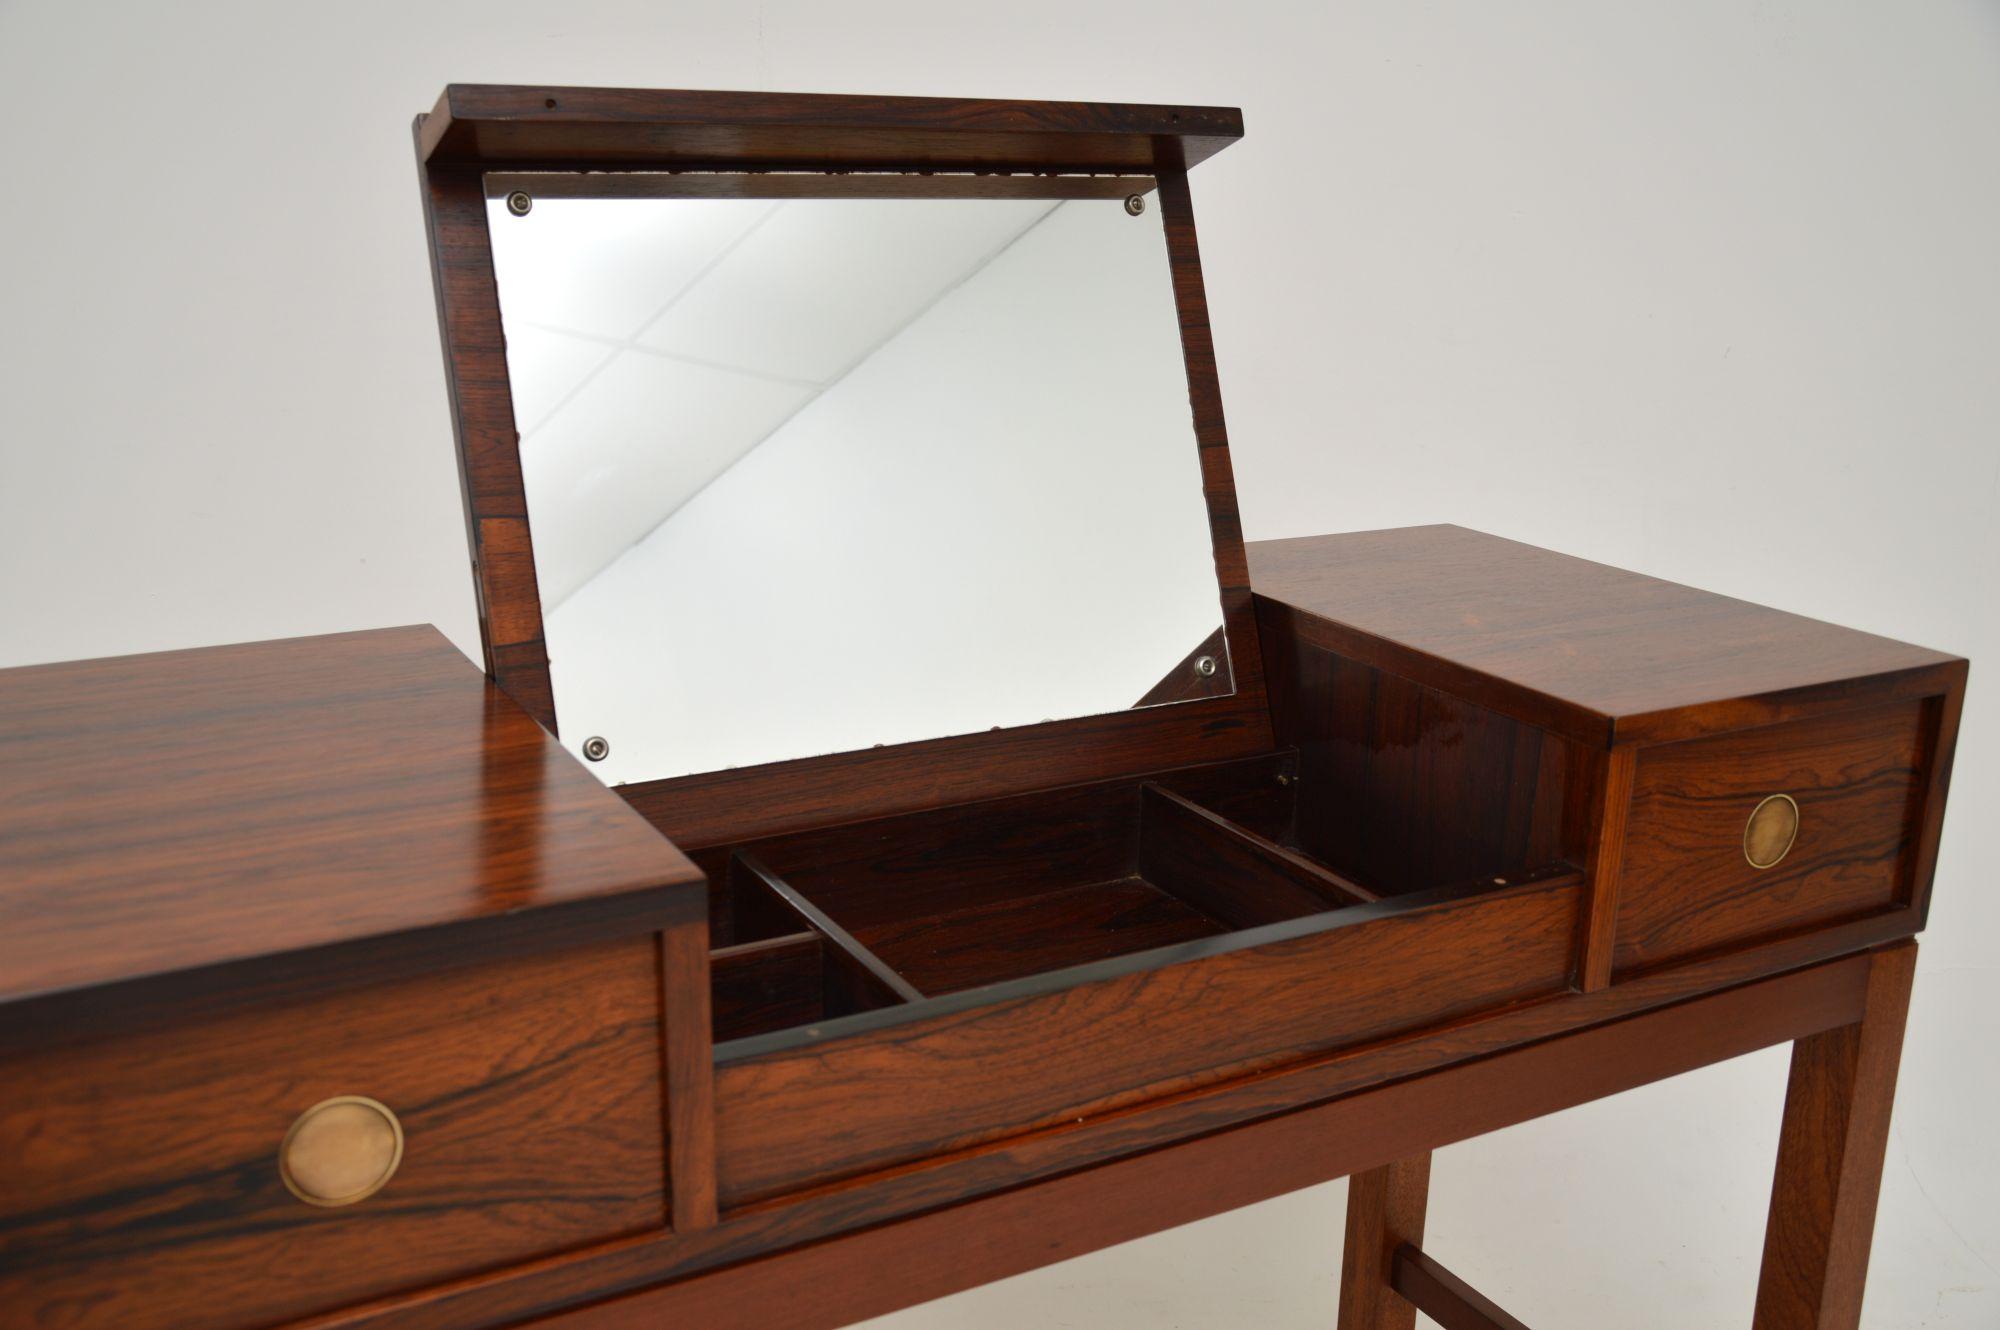 A beautiful Danish vintage dressing table by Dyrlund. This was made in Denmark and dates from around the 1960-70’s.

The quality is amazing, this has a fantastic design where the centre section flips up to reveal a mirror and storage compartments.